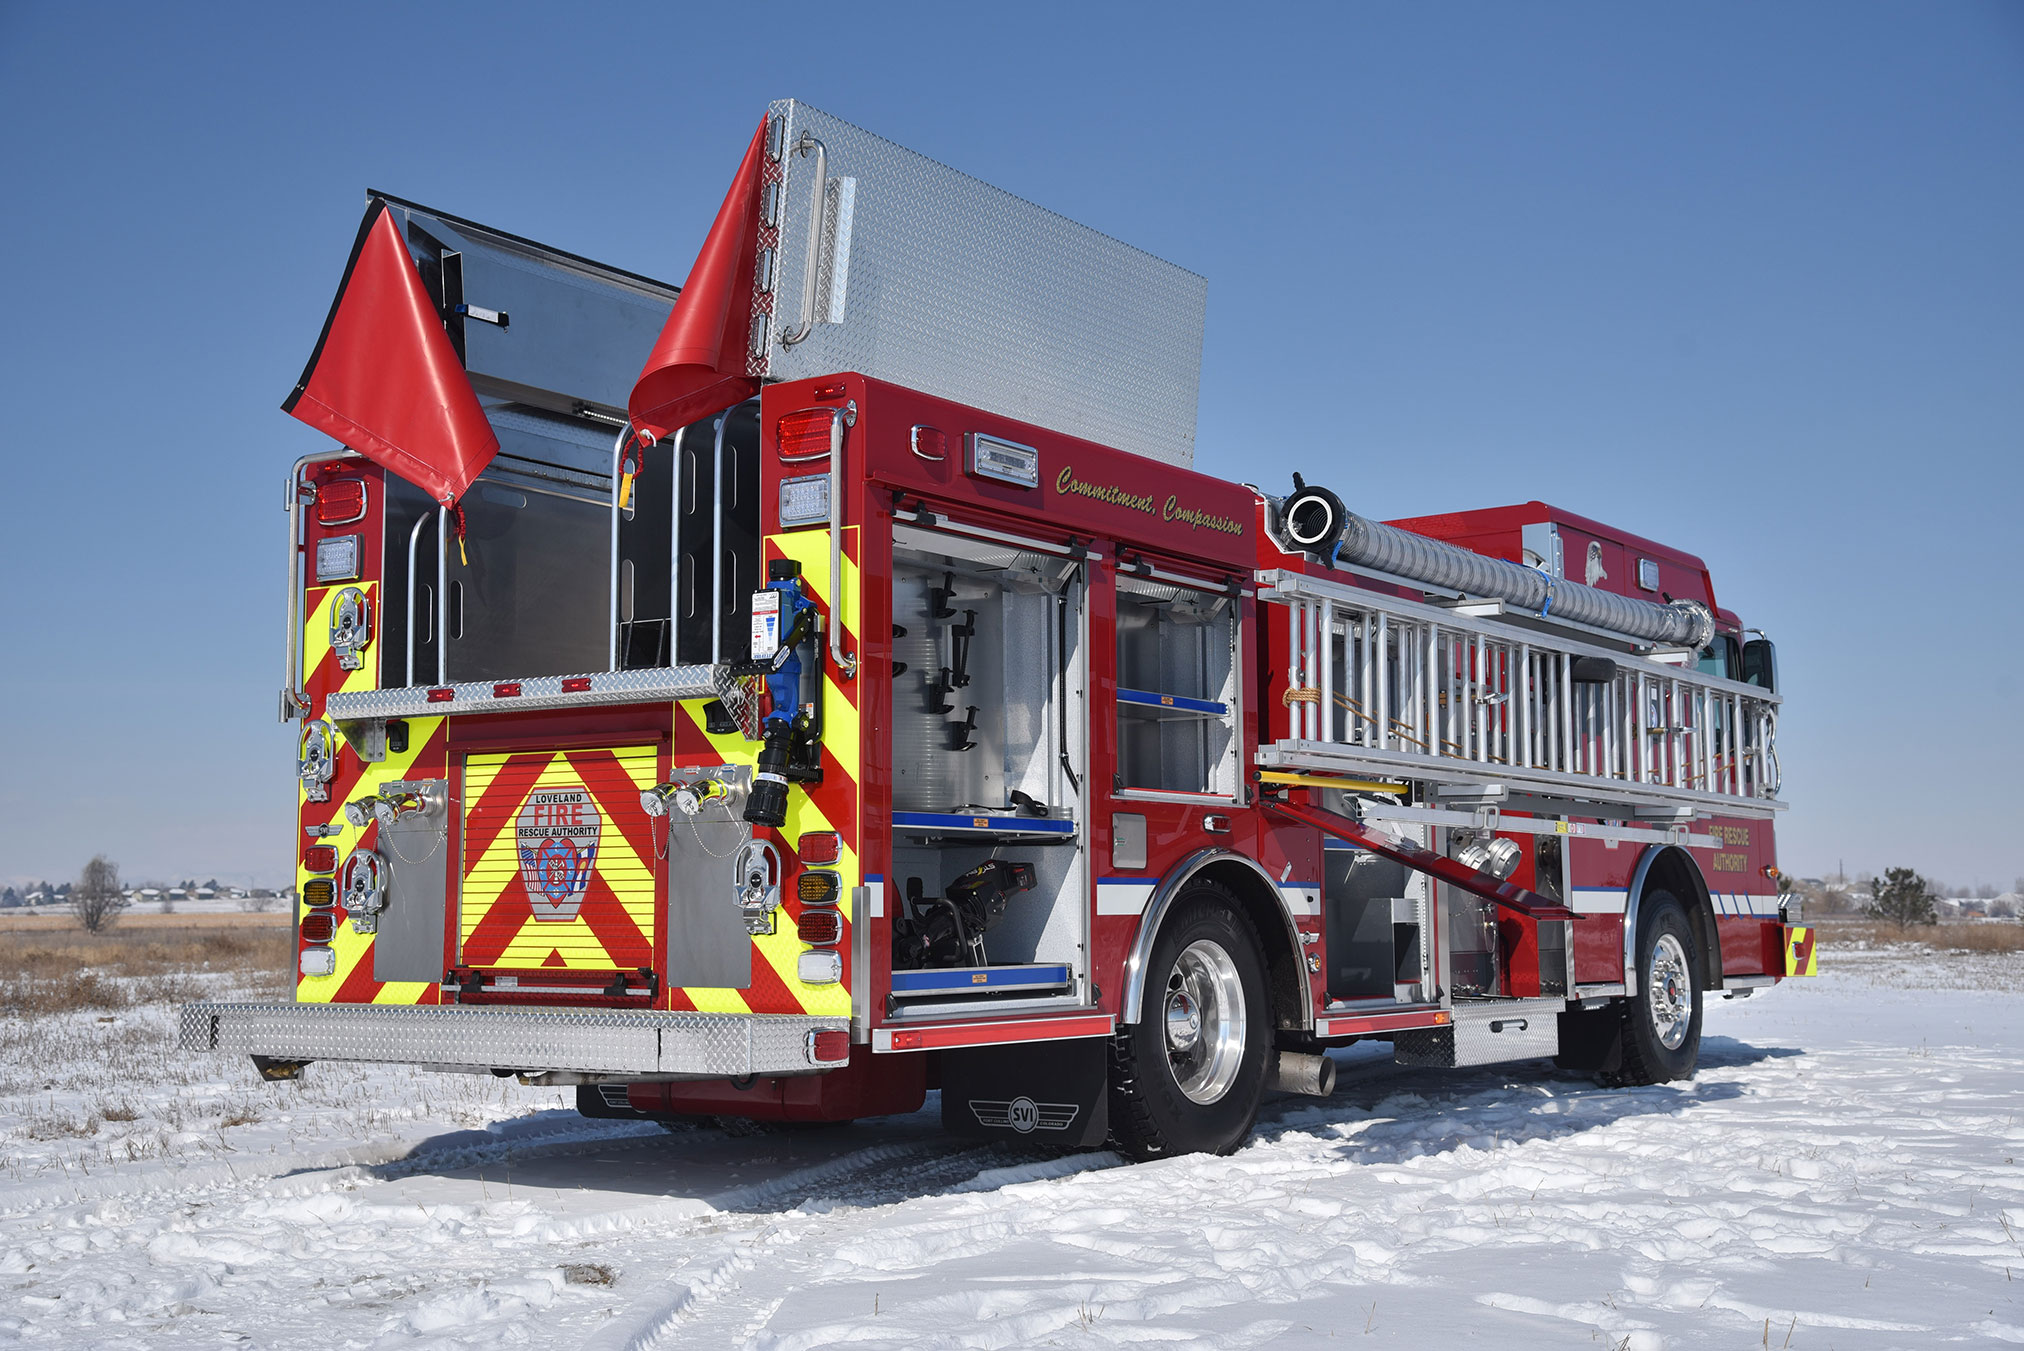 Featured image for “Loveland, CO Rescue Pumper #1016”